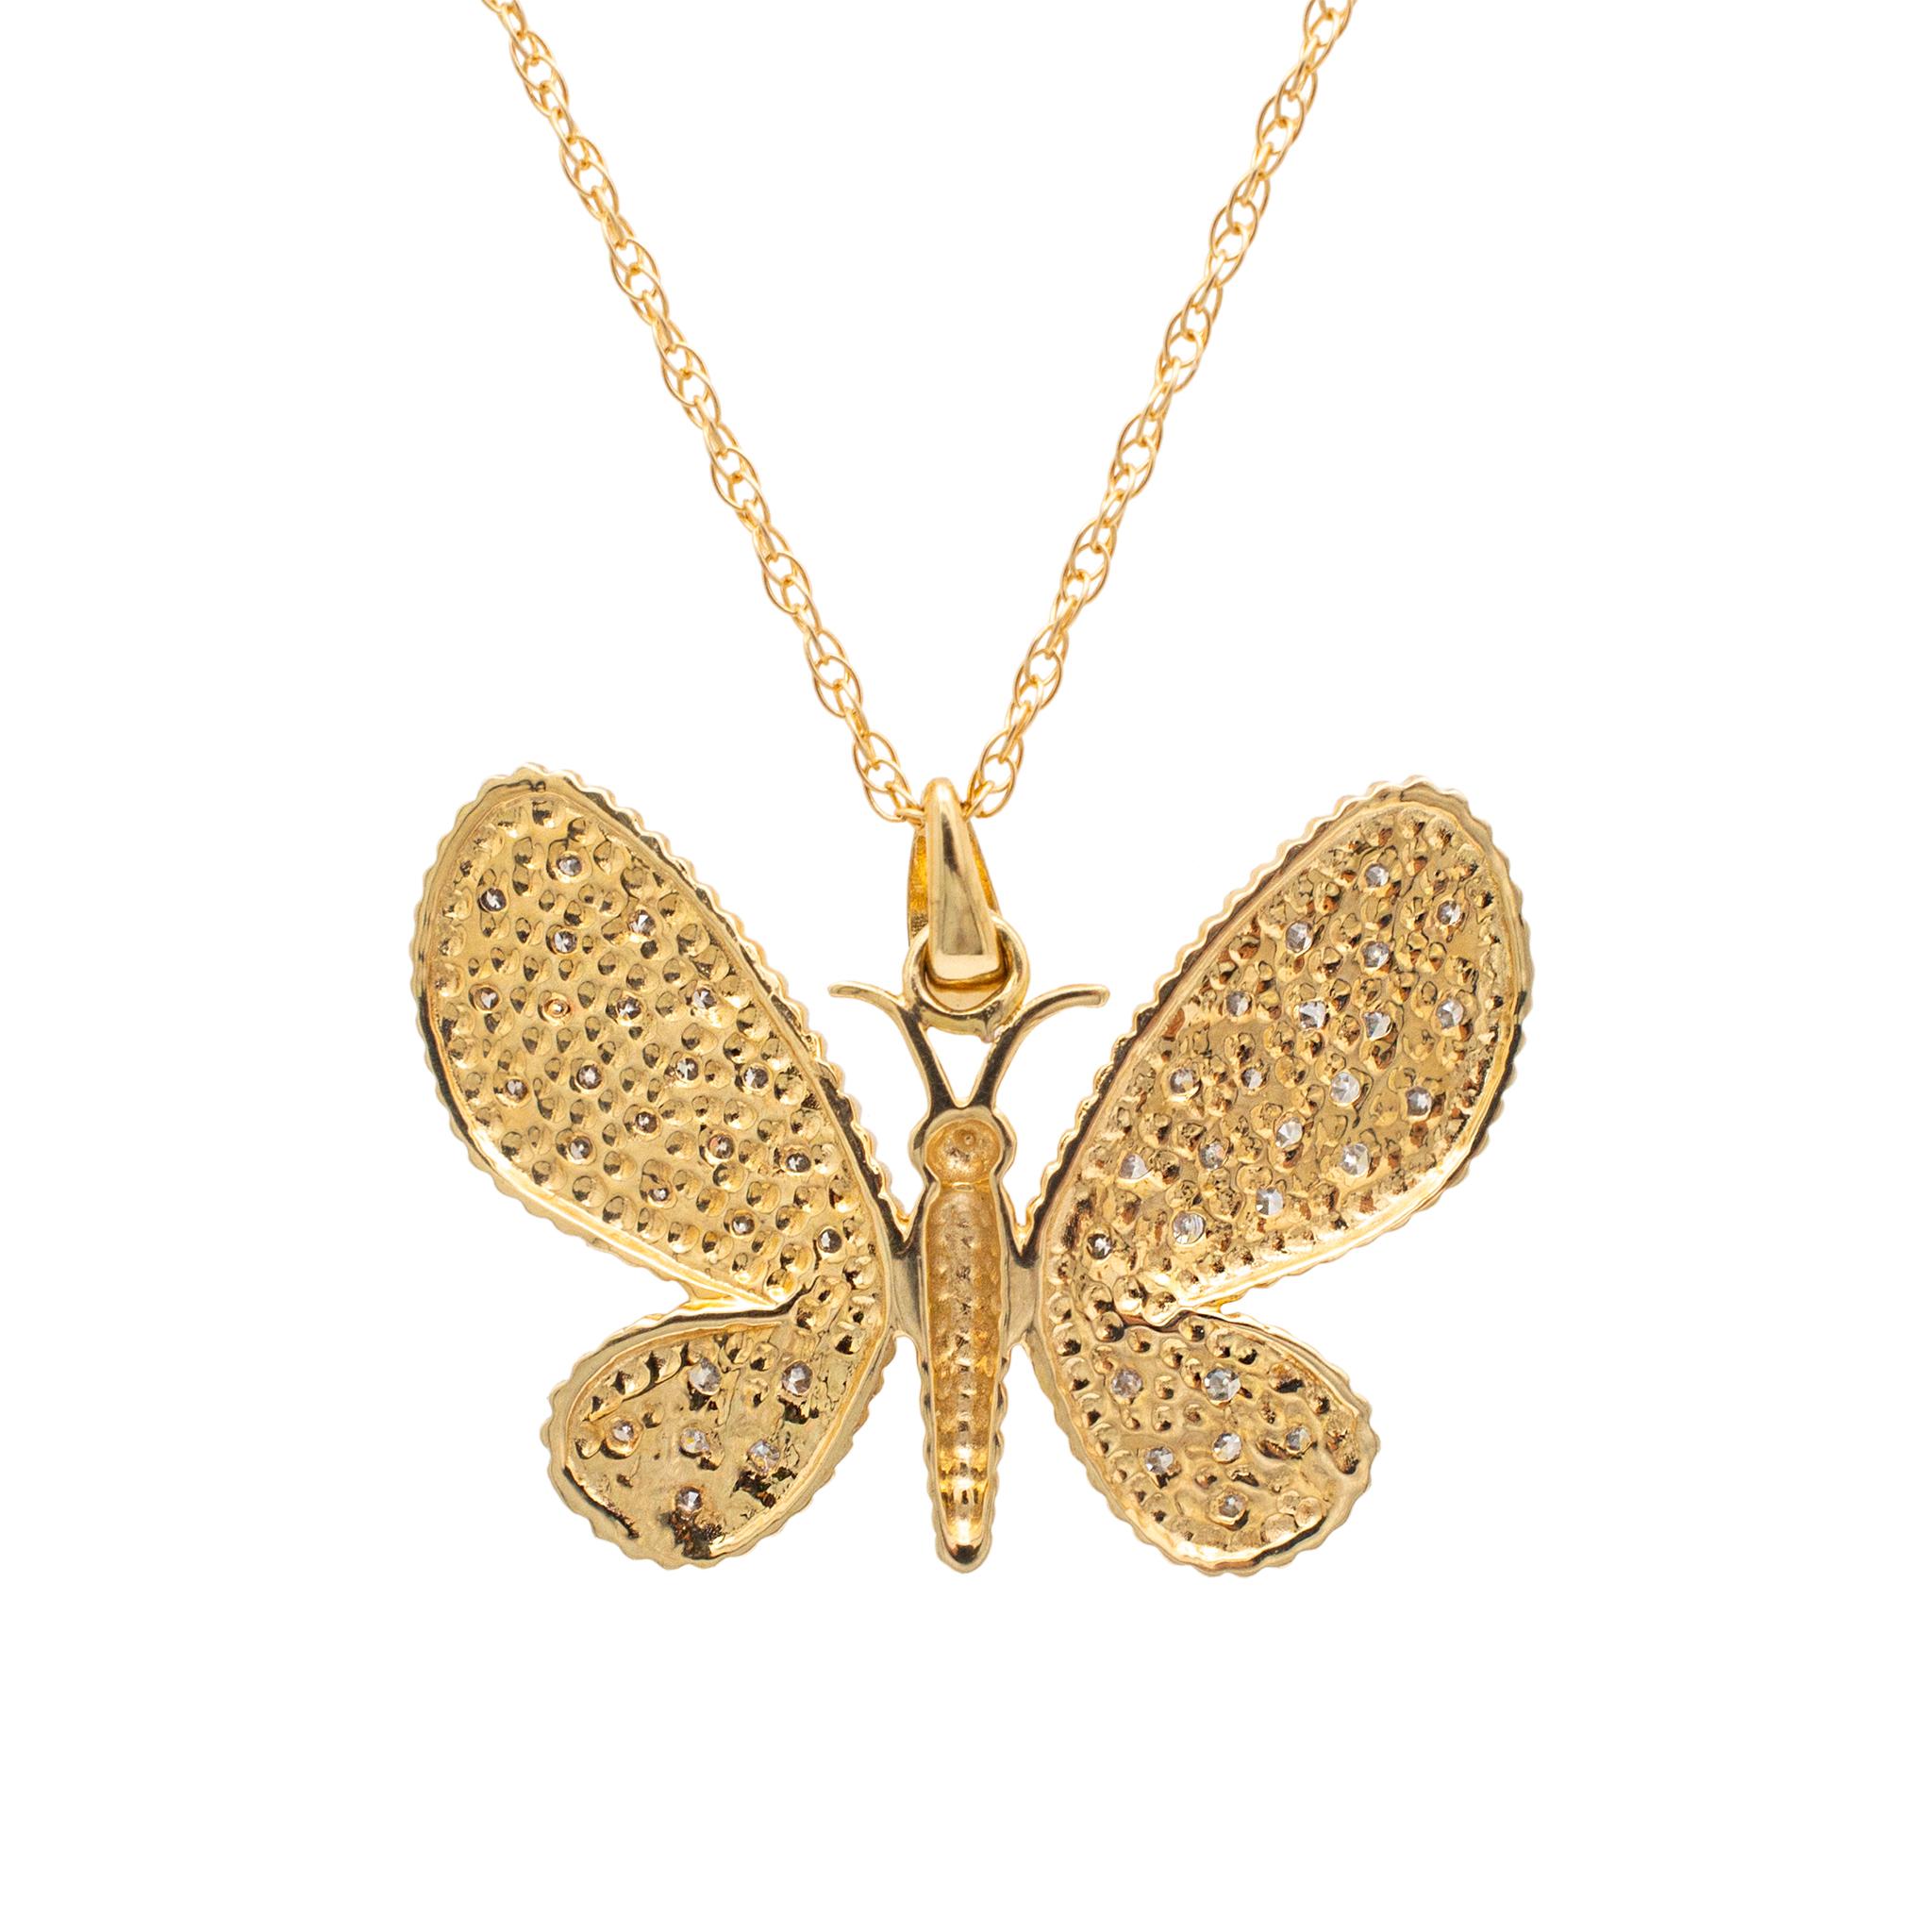 Ladies 14K Yellow Gold Cluster Pave Diamond Butterfly Pendant Necklace In Excellent Condition For Sale In Houston, TX